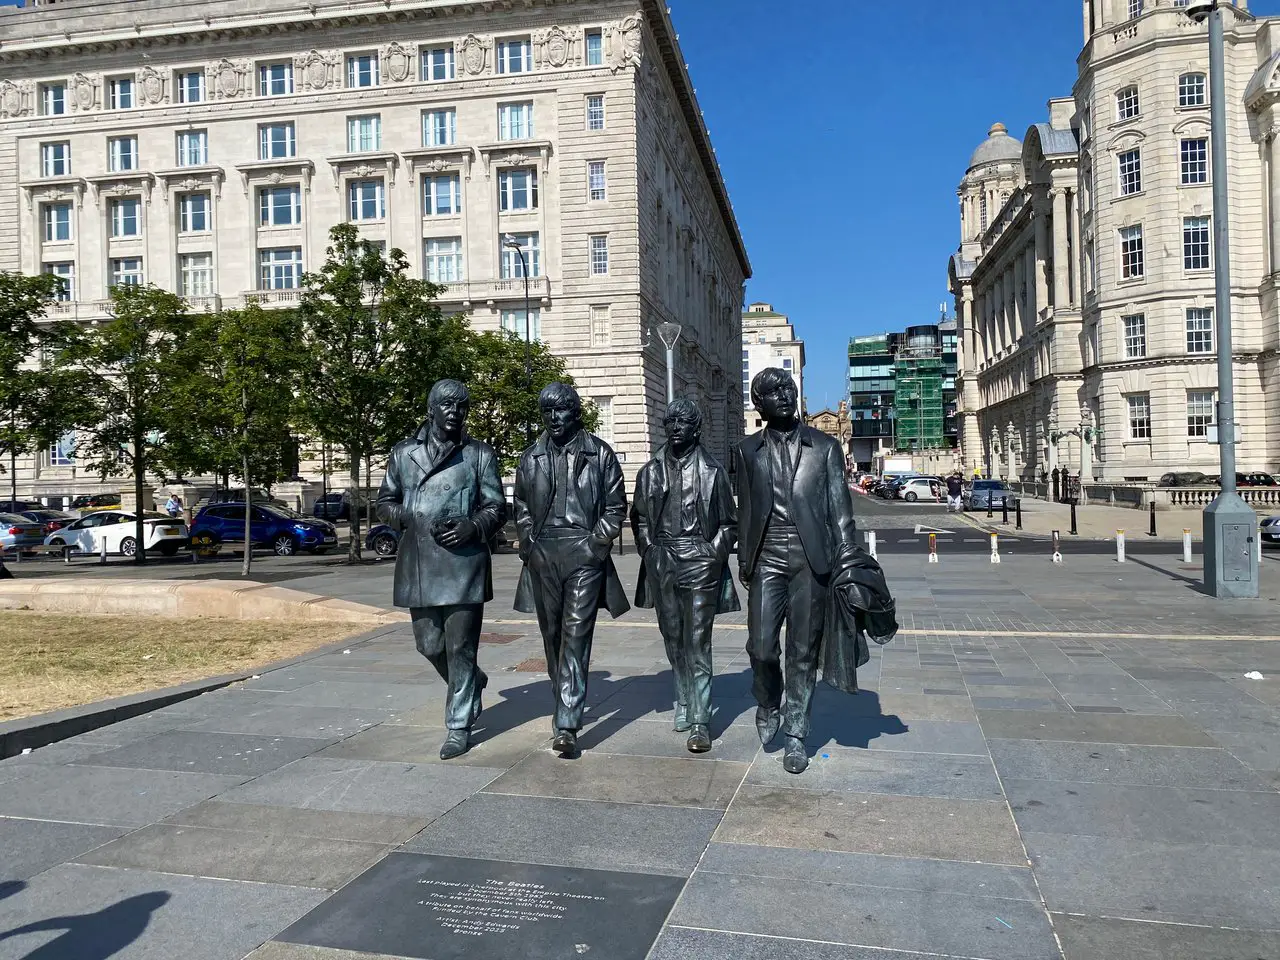 The Beatles Statue, one of the top Beatles landmarks in Liverpool at Pier Head.